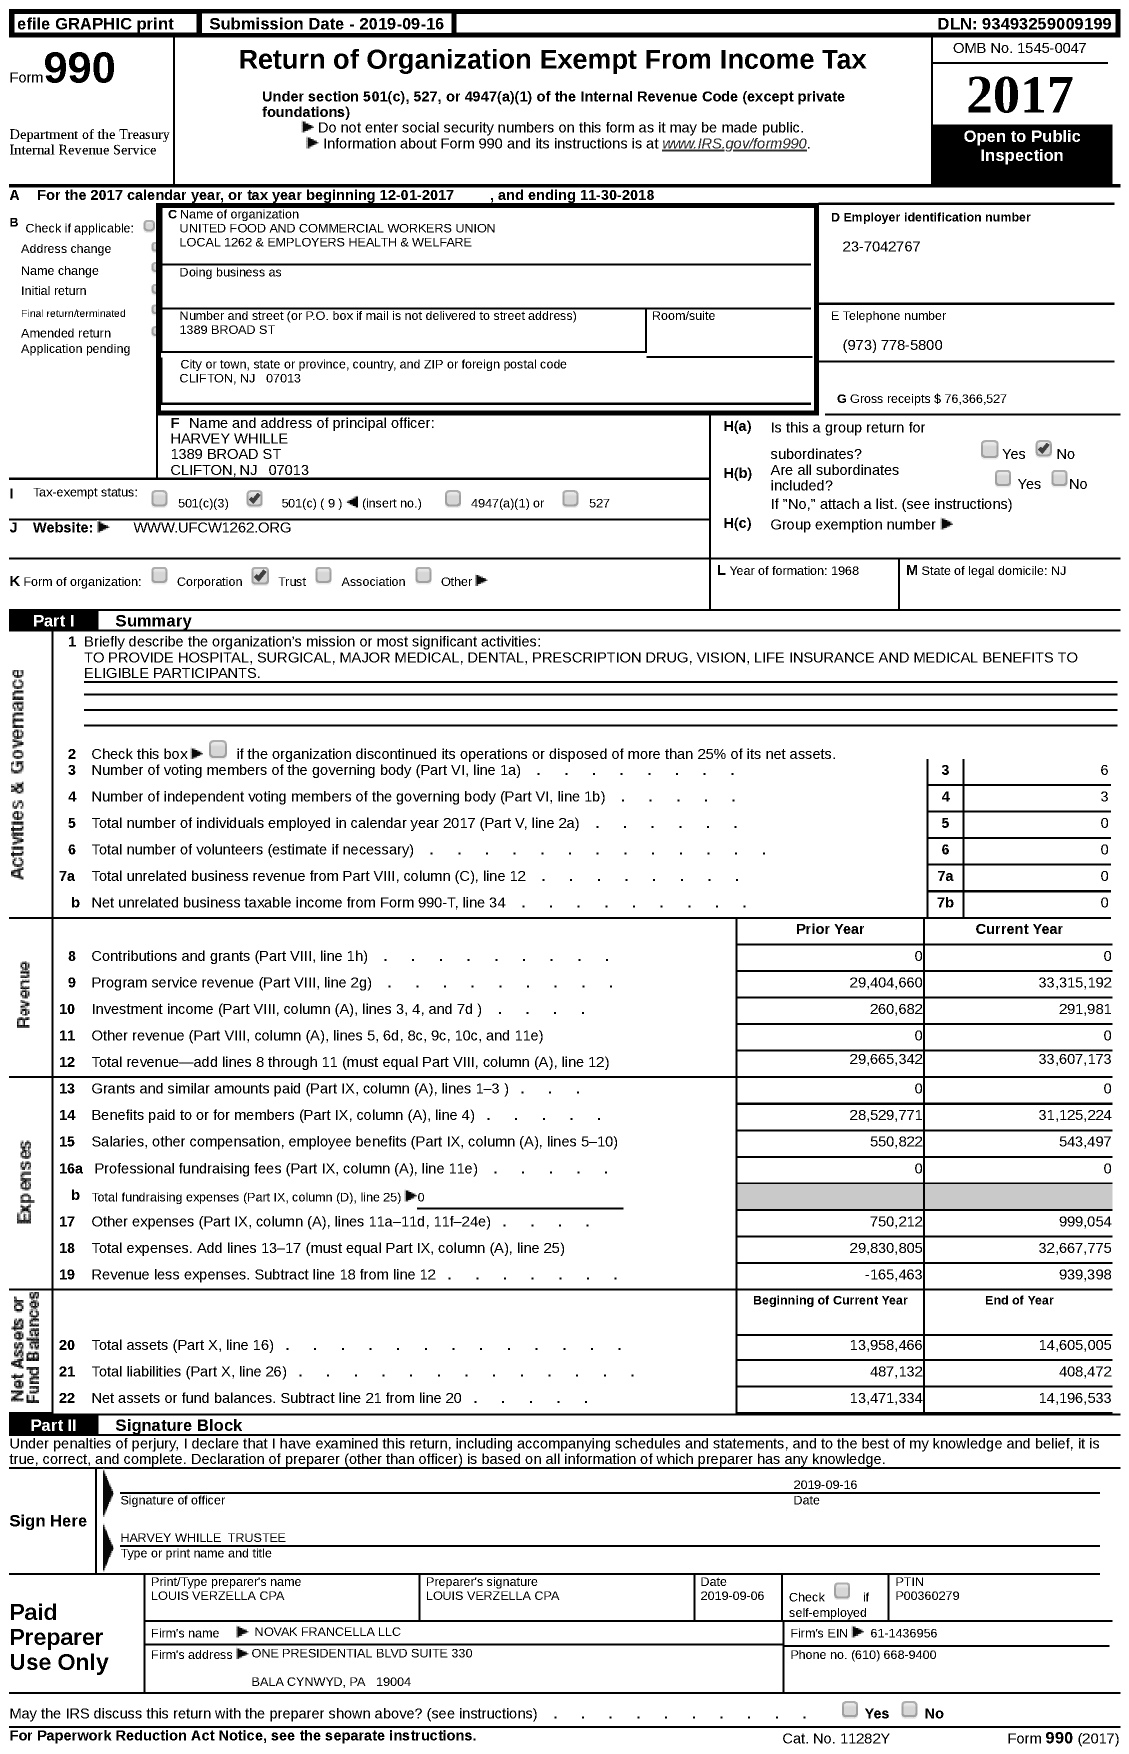 Image of first page of 2017 Form 990 for United Food and Commercial Workers Union Local 1262 and Employers Health and Welfare